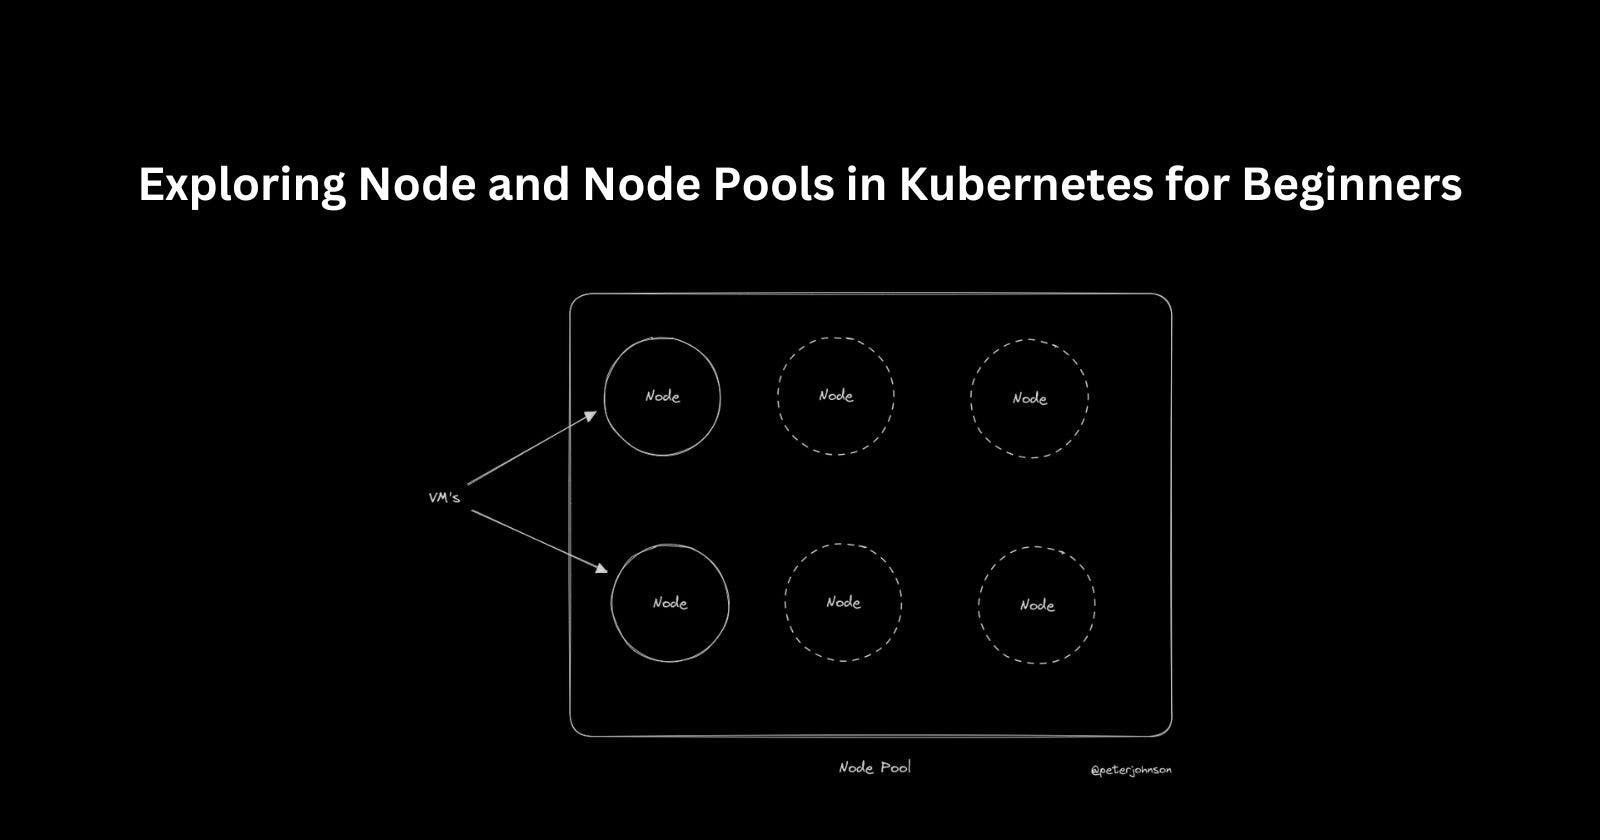 Exploring Node and Node Pools in Kubernetes for Beginners